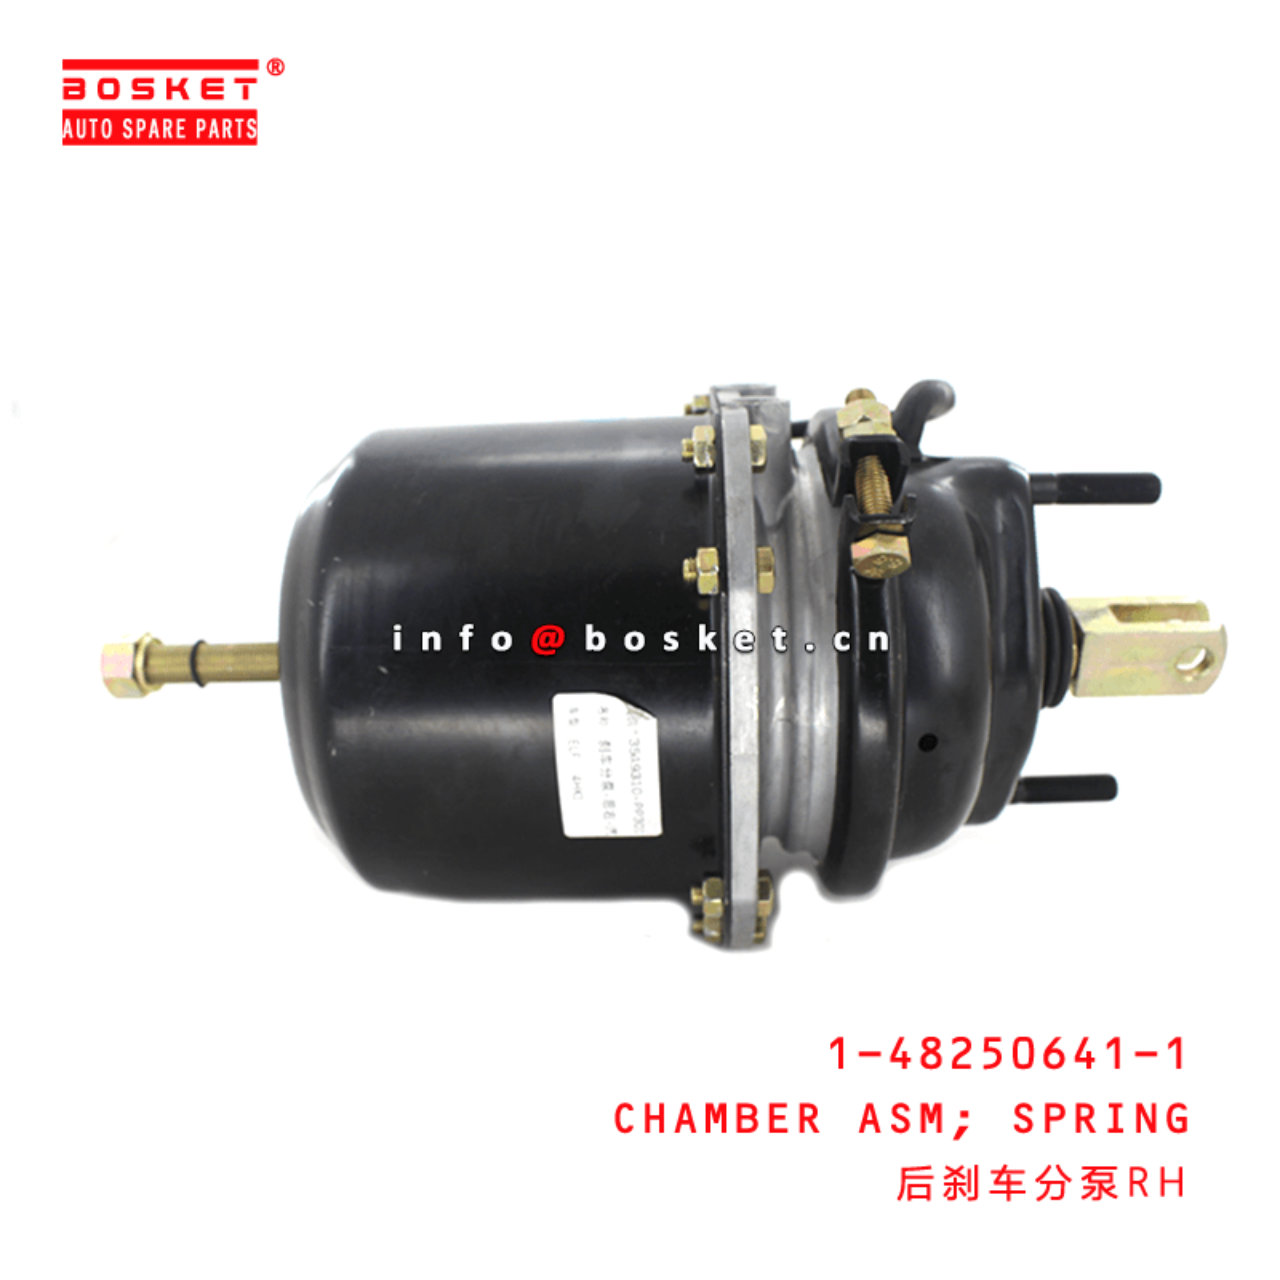 1-48250641-1 Spring Chamber Assembly 1482506411 Suitable for ISUZU FVR34 VC46 6HK1